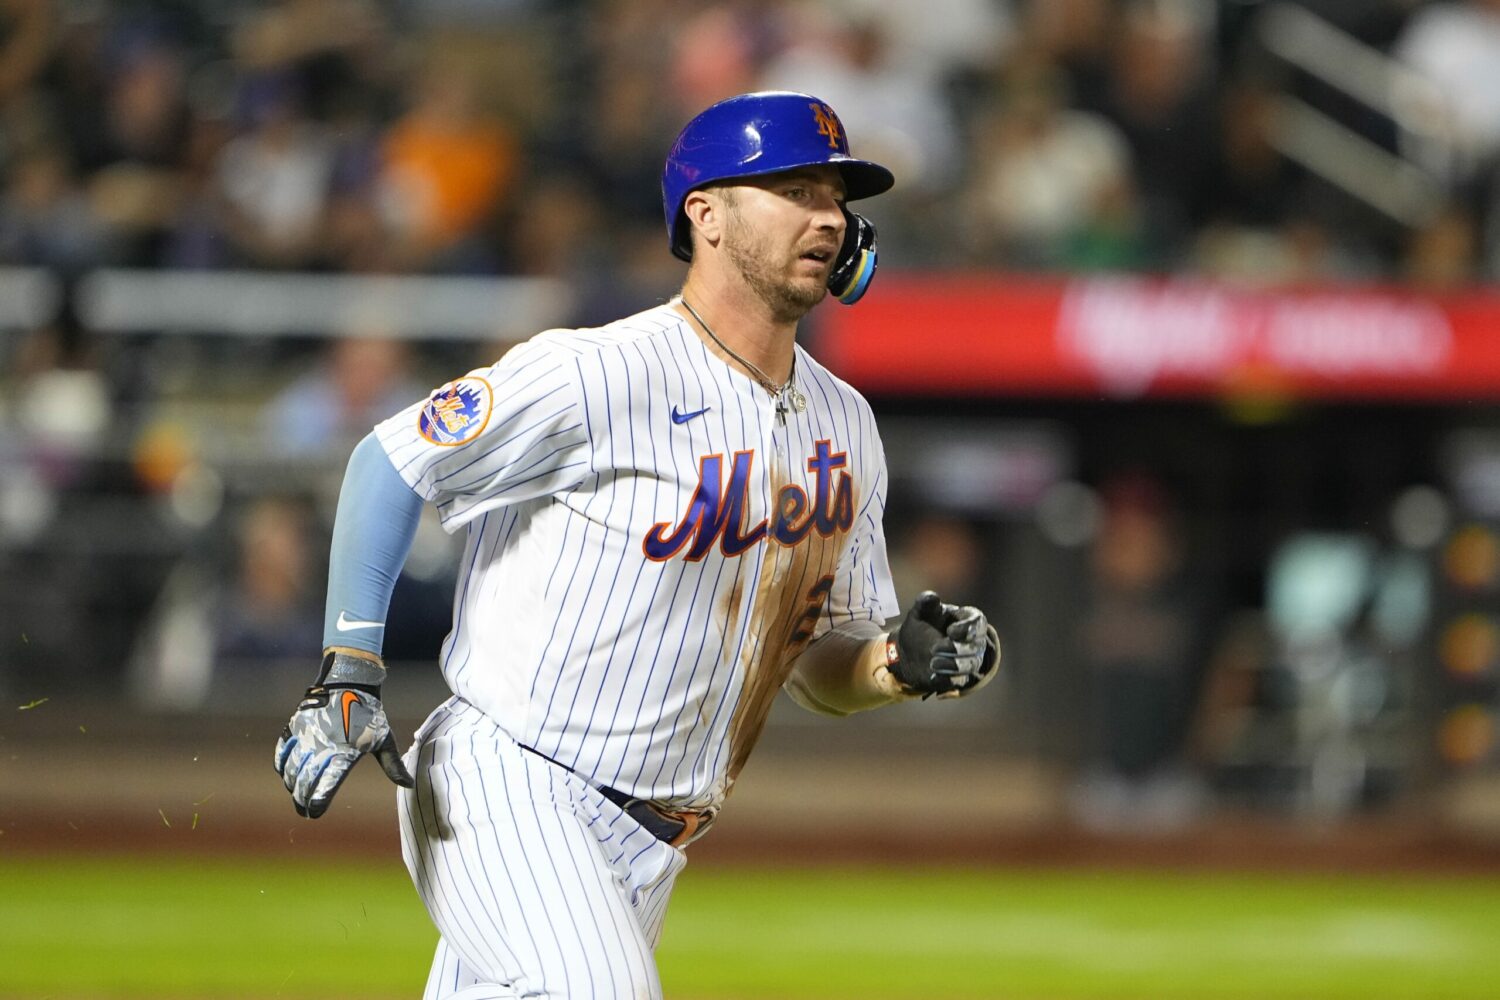 MLB Insider on New York Mets free agents: The Mets are said to be